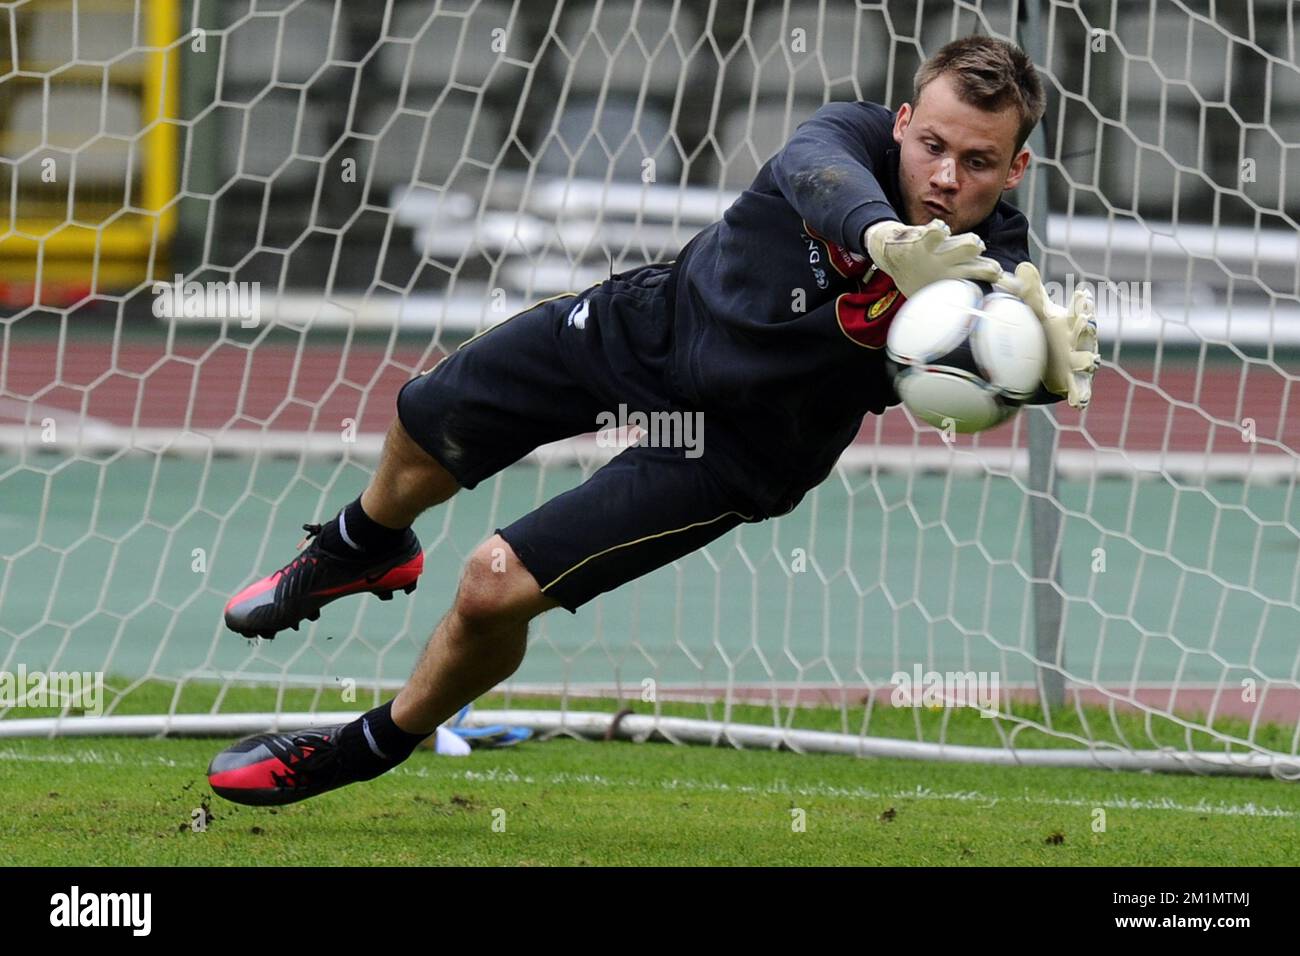 20120531 - BRUSSELS, BELGIUM: Belgium's goalkeeper Simon Mignolet pictured during a training session of the Red Devils, the Belgian national soccer team, at the Koning Boudewijn Stadion - Stade Roi Baudouin, in Brussels, Thursday 31 May 2012. The team is preparing for a friendly game against England, on 02 June 2012. BELGA PHOTO DIRK WAEM Stock Photo